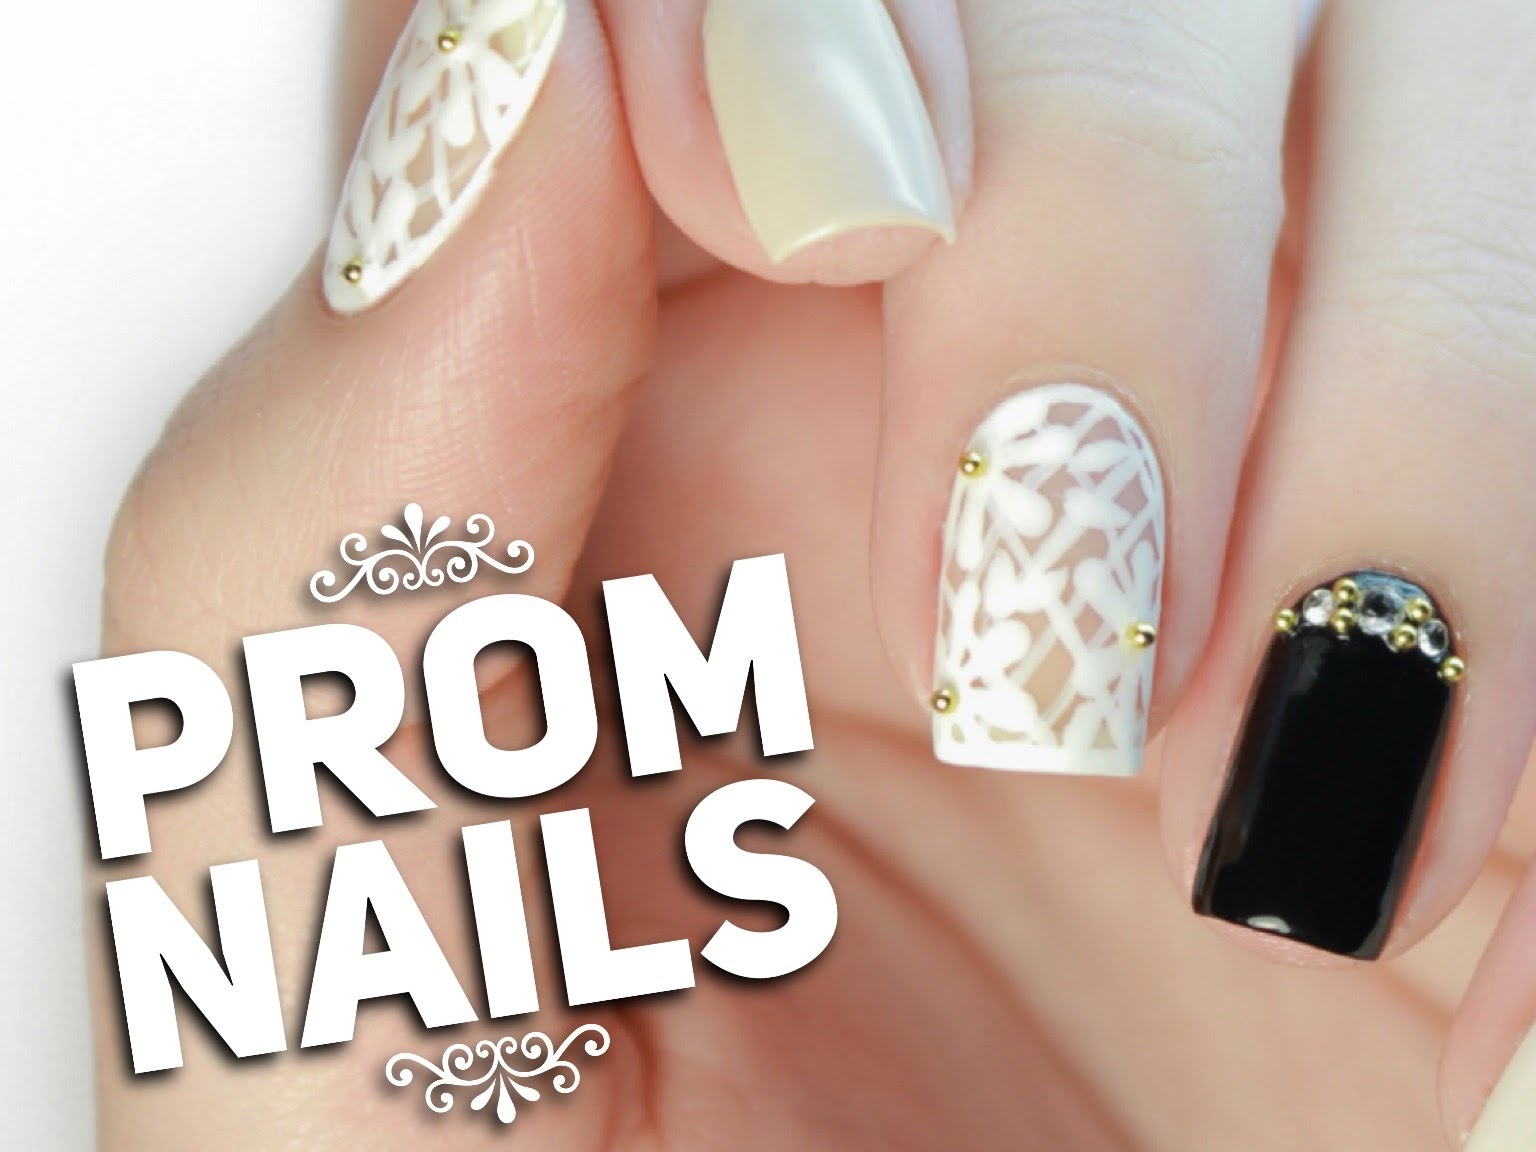 9. Diamond Nail Art for Prom on Tumblr - wide 4